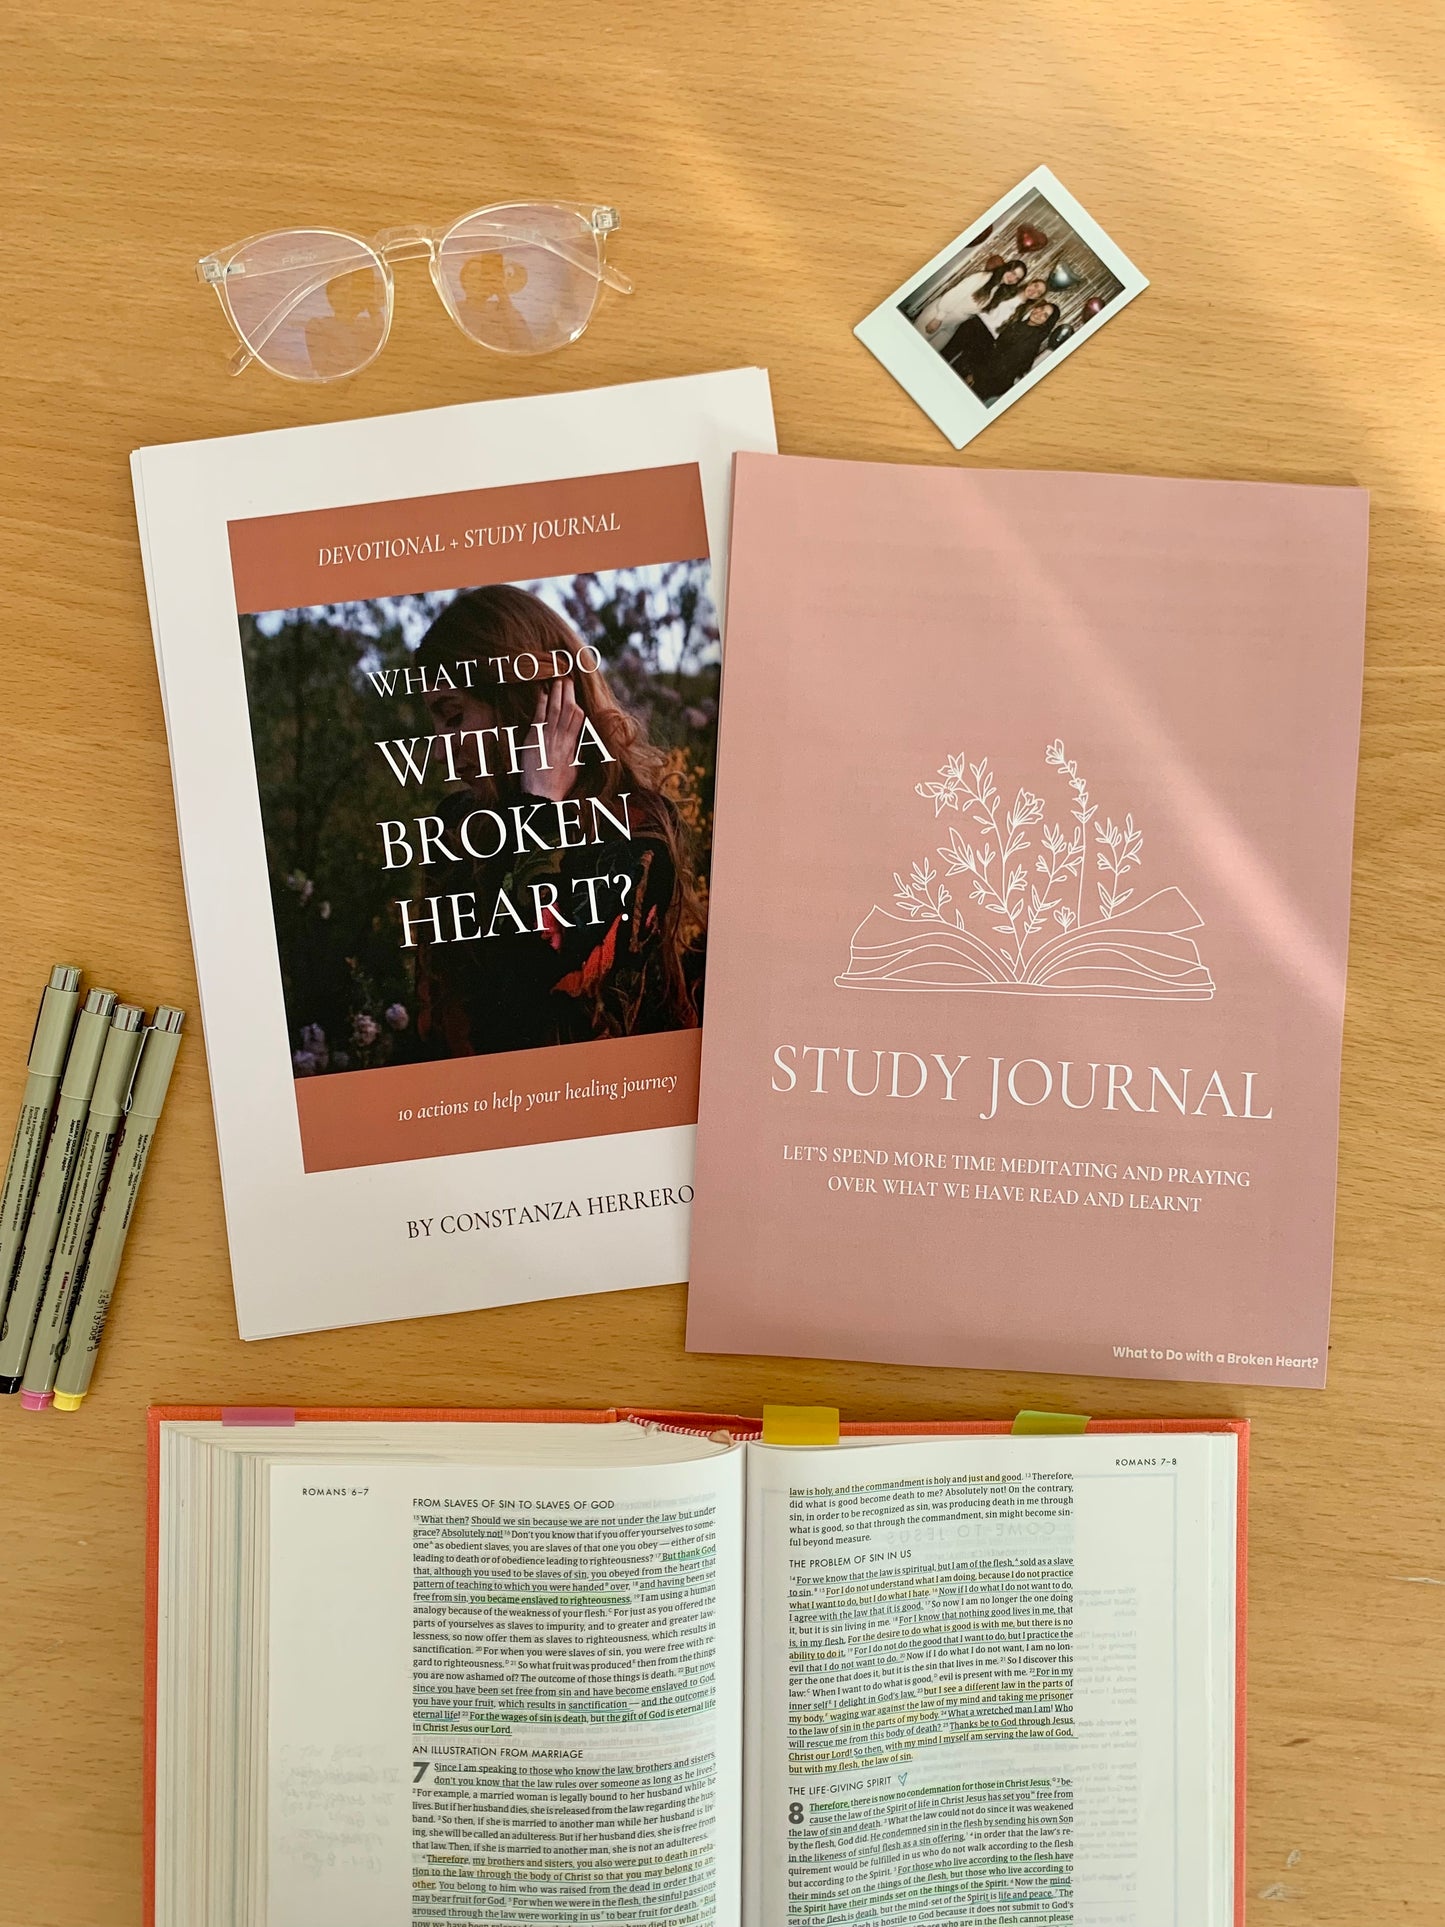 What to Do with a Broken Heart?: Devotional + Study Journal (PDF Download)